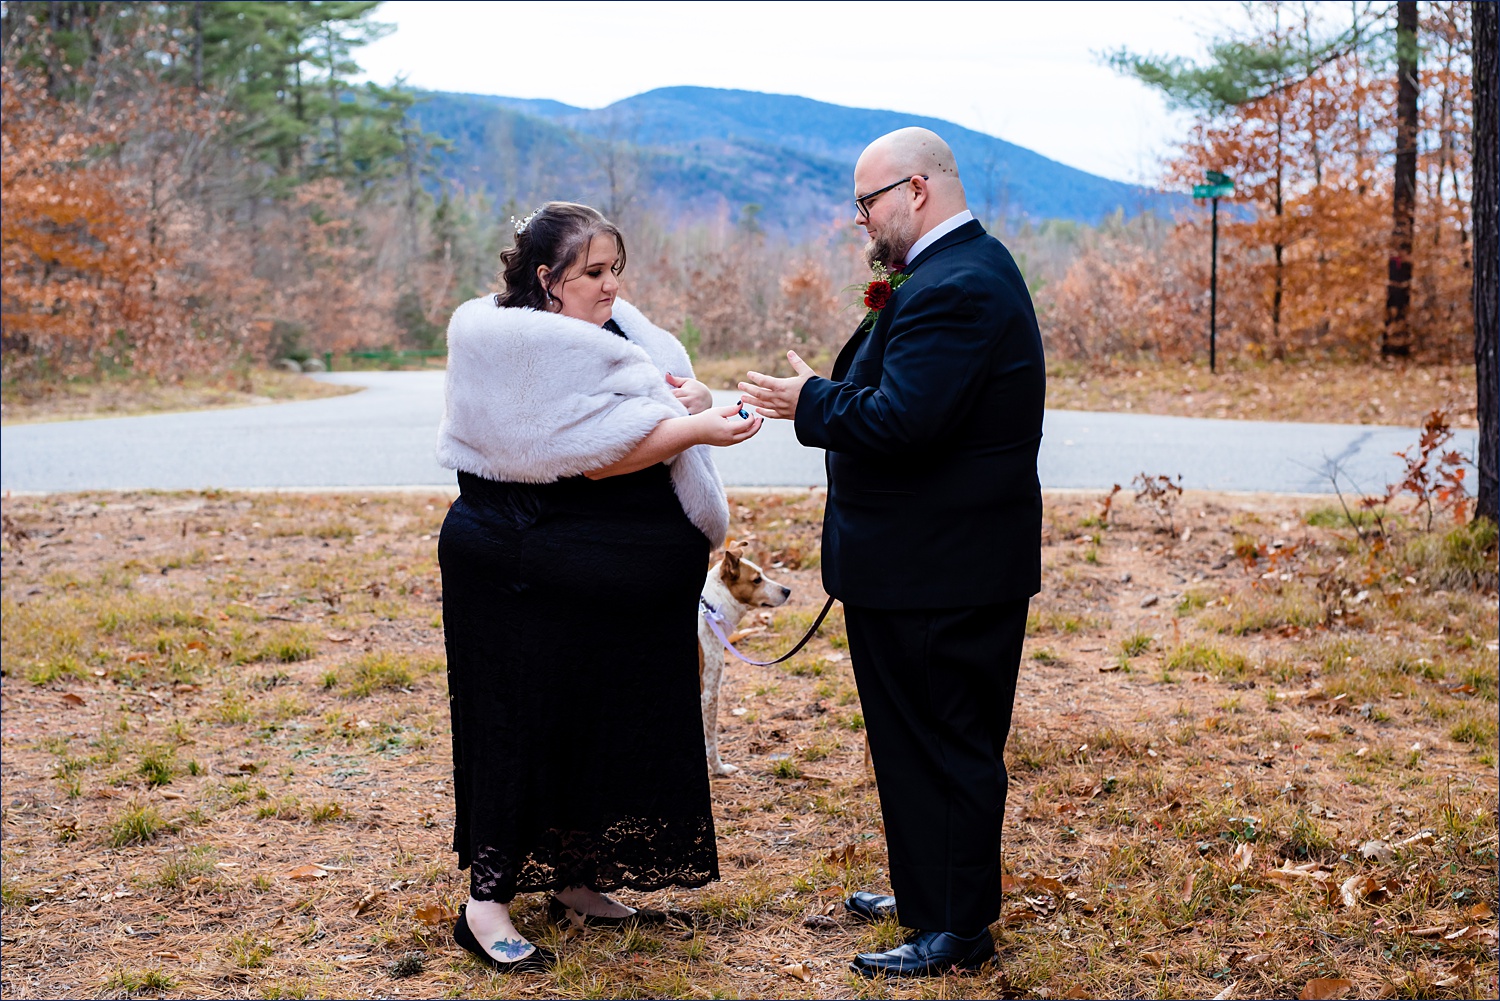 Exchanging rings on the wedding day in NH